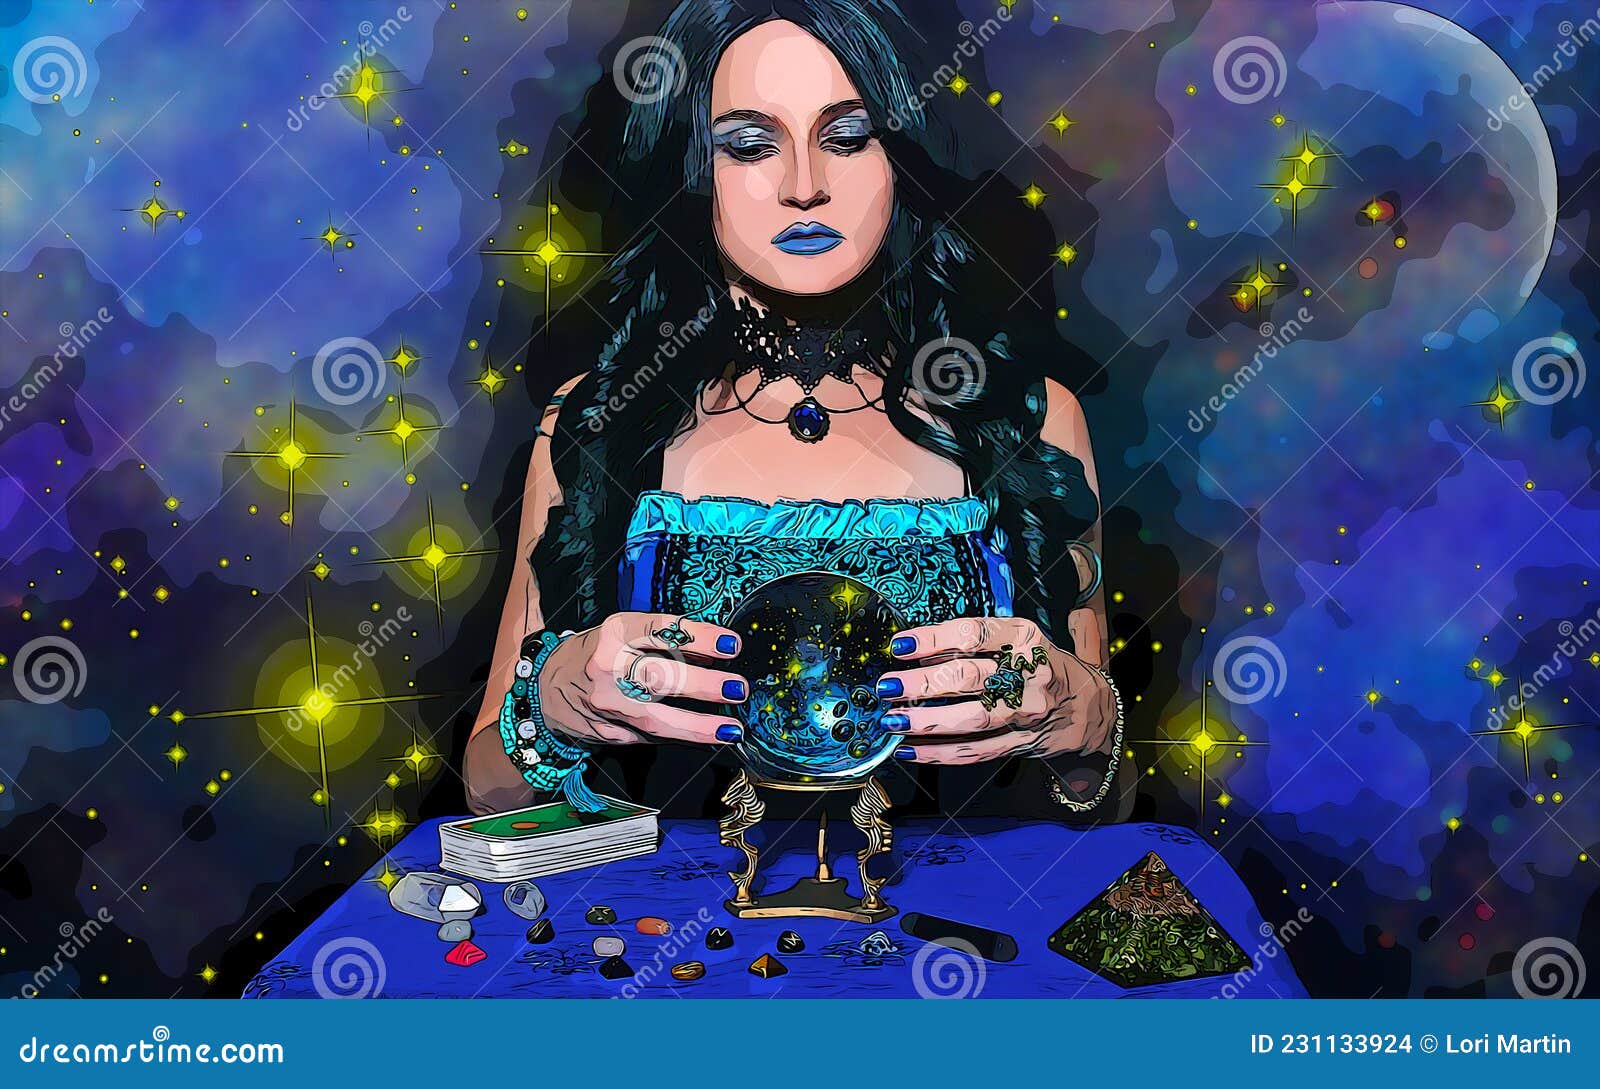 Review of the Psychic Tarot for the Heart Oracle Deck